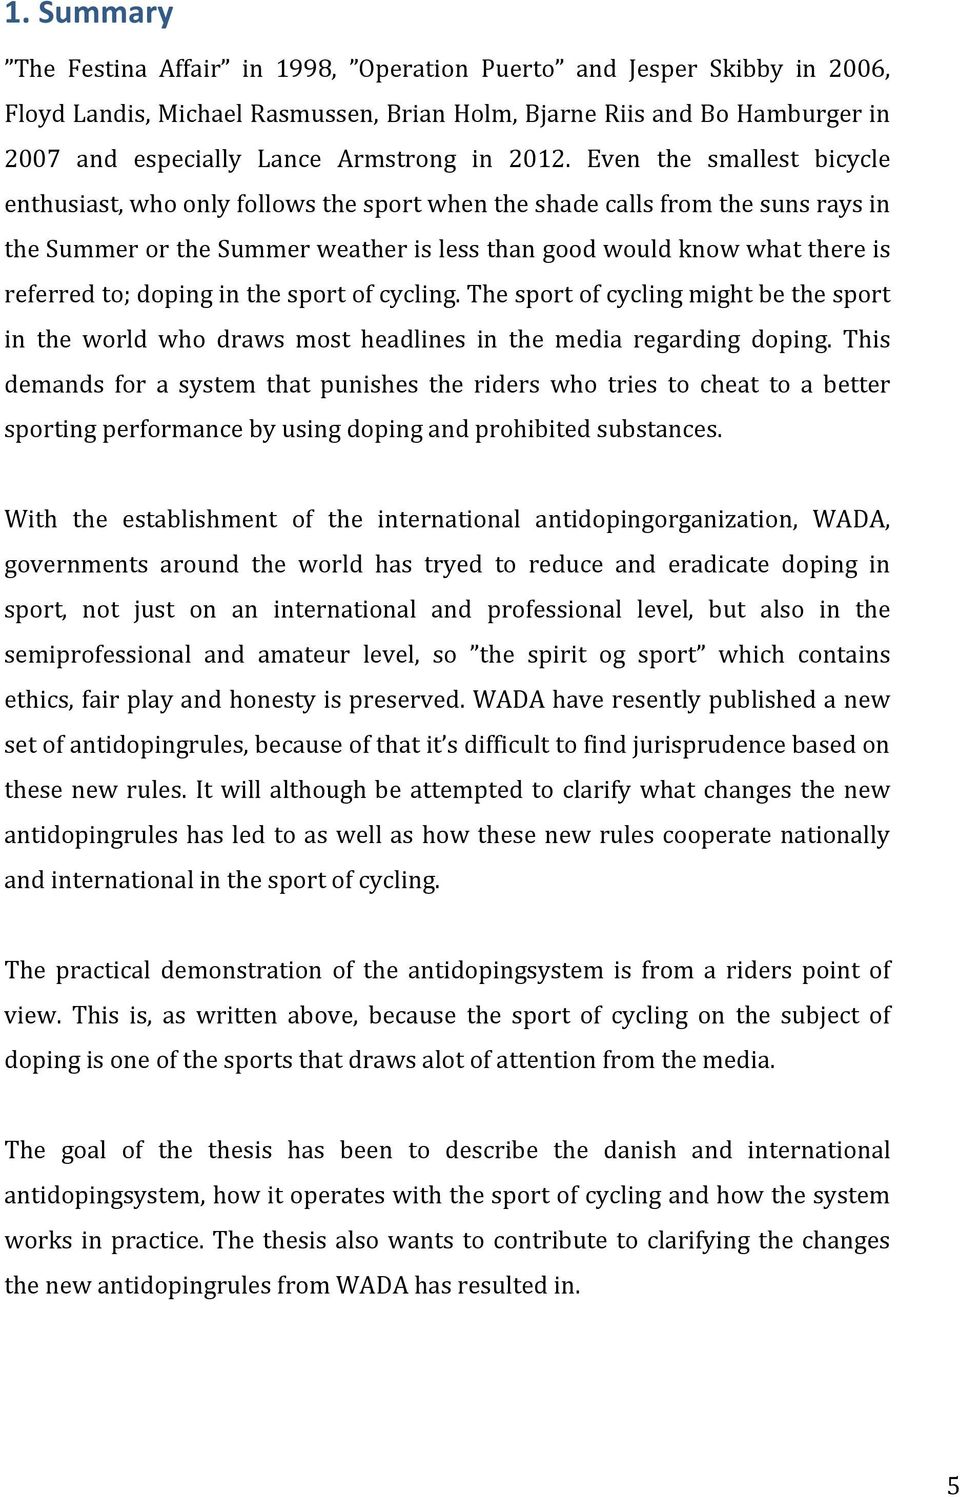 to; doping in the sport of cycling. The sport of cycling might be the sport in the world who draws most headlines in the media regarding doping.